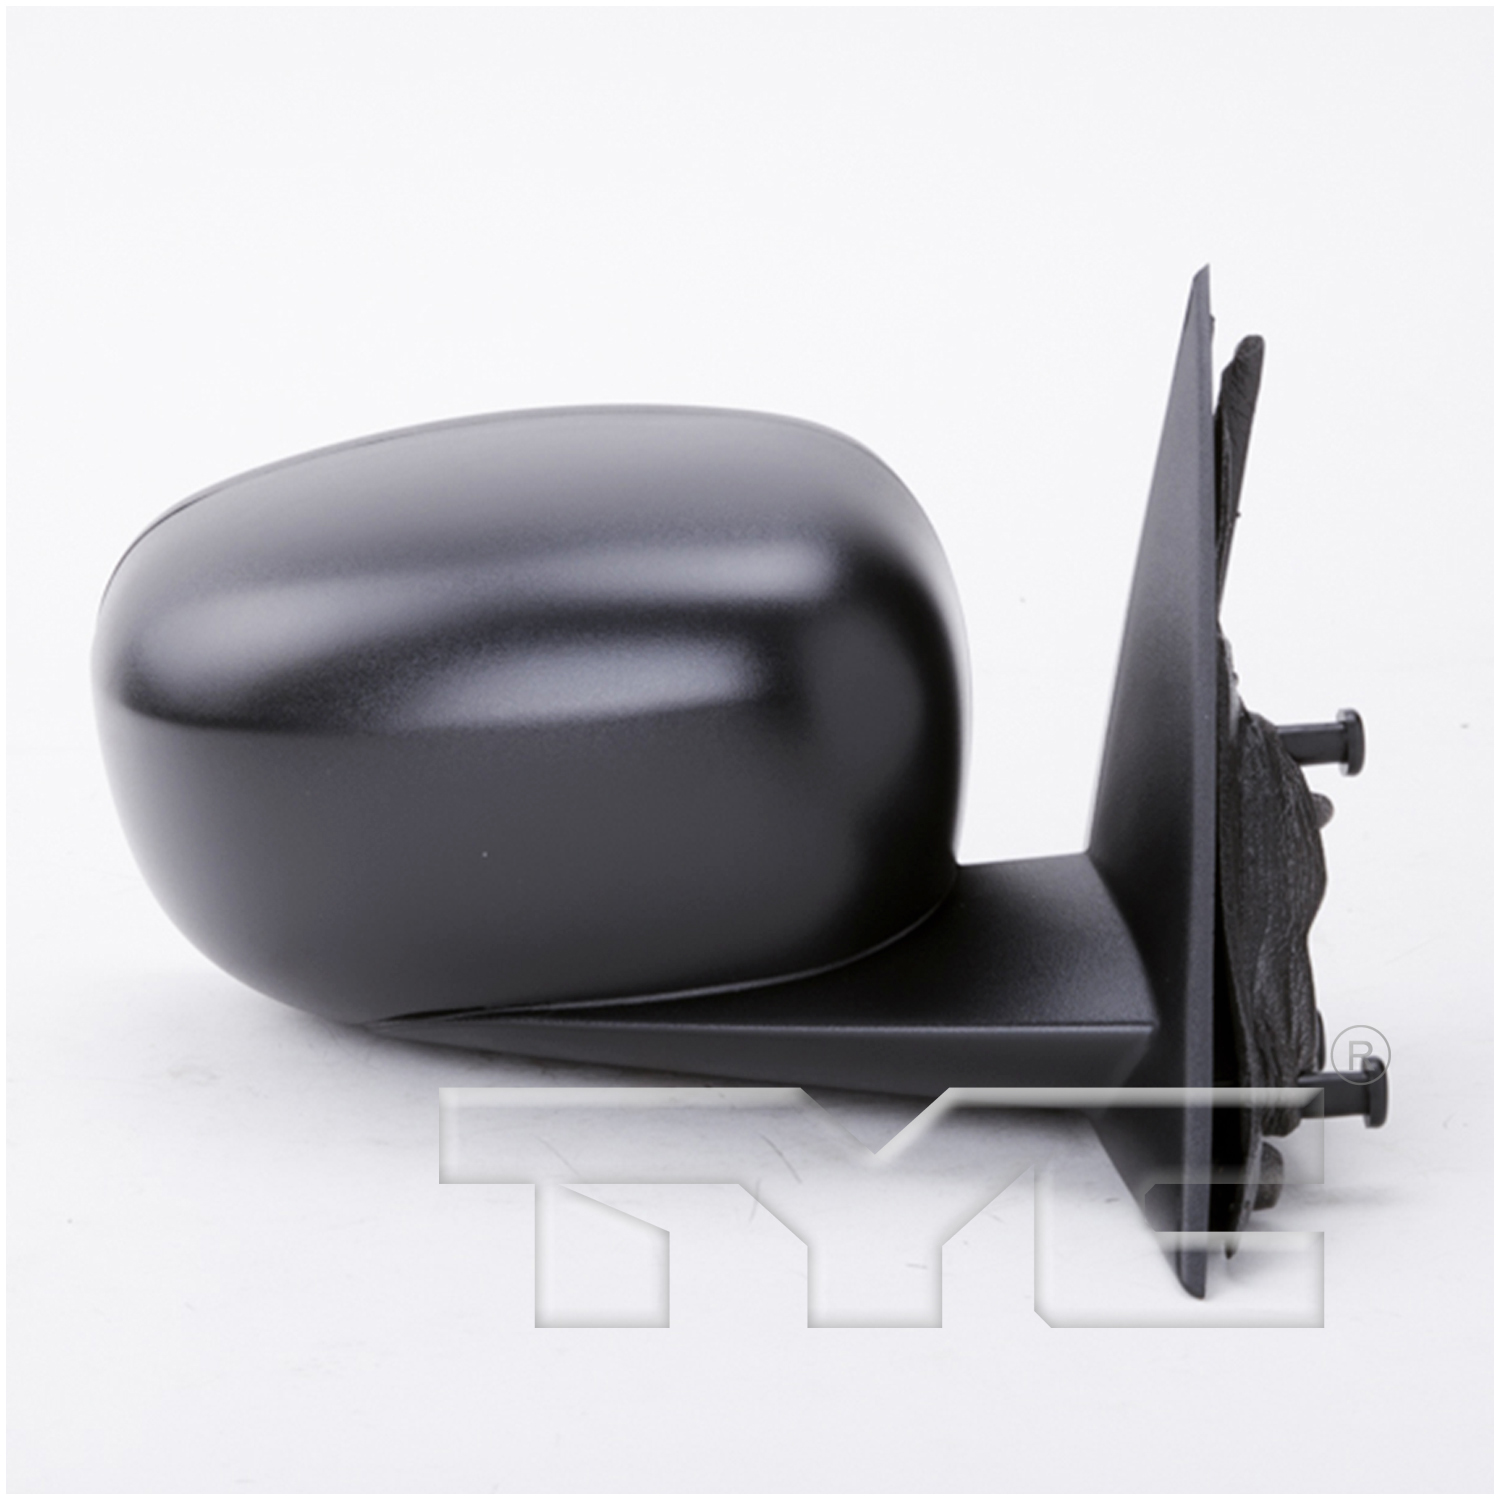 Aftermarket MIRRORS for CHRYSLER - 300, 300,05-05,RT Mirror outside rear view